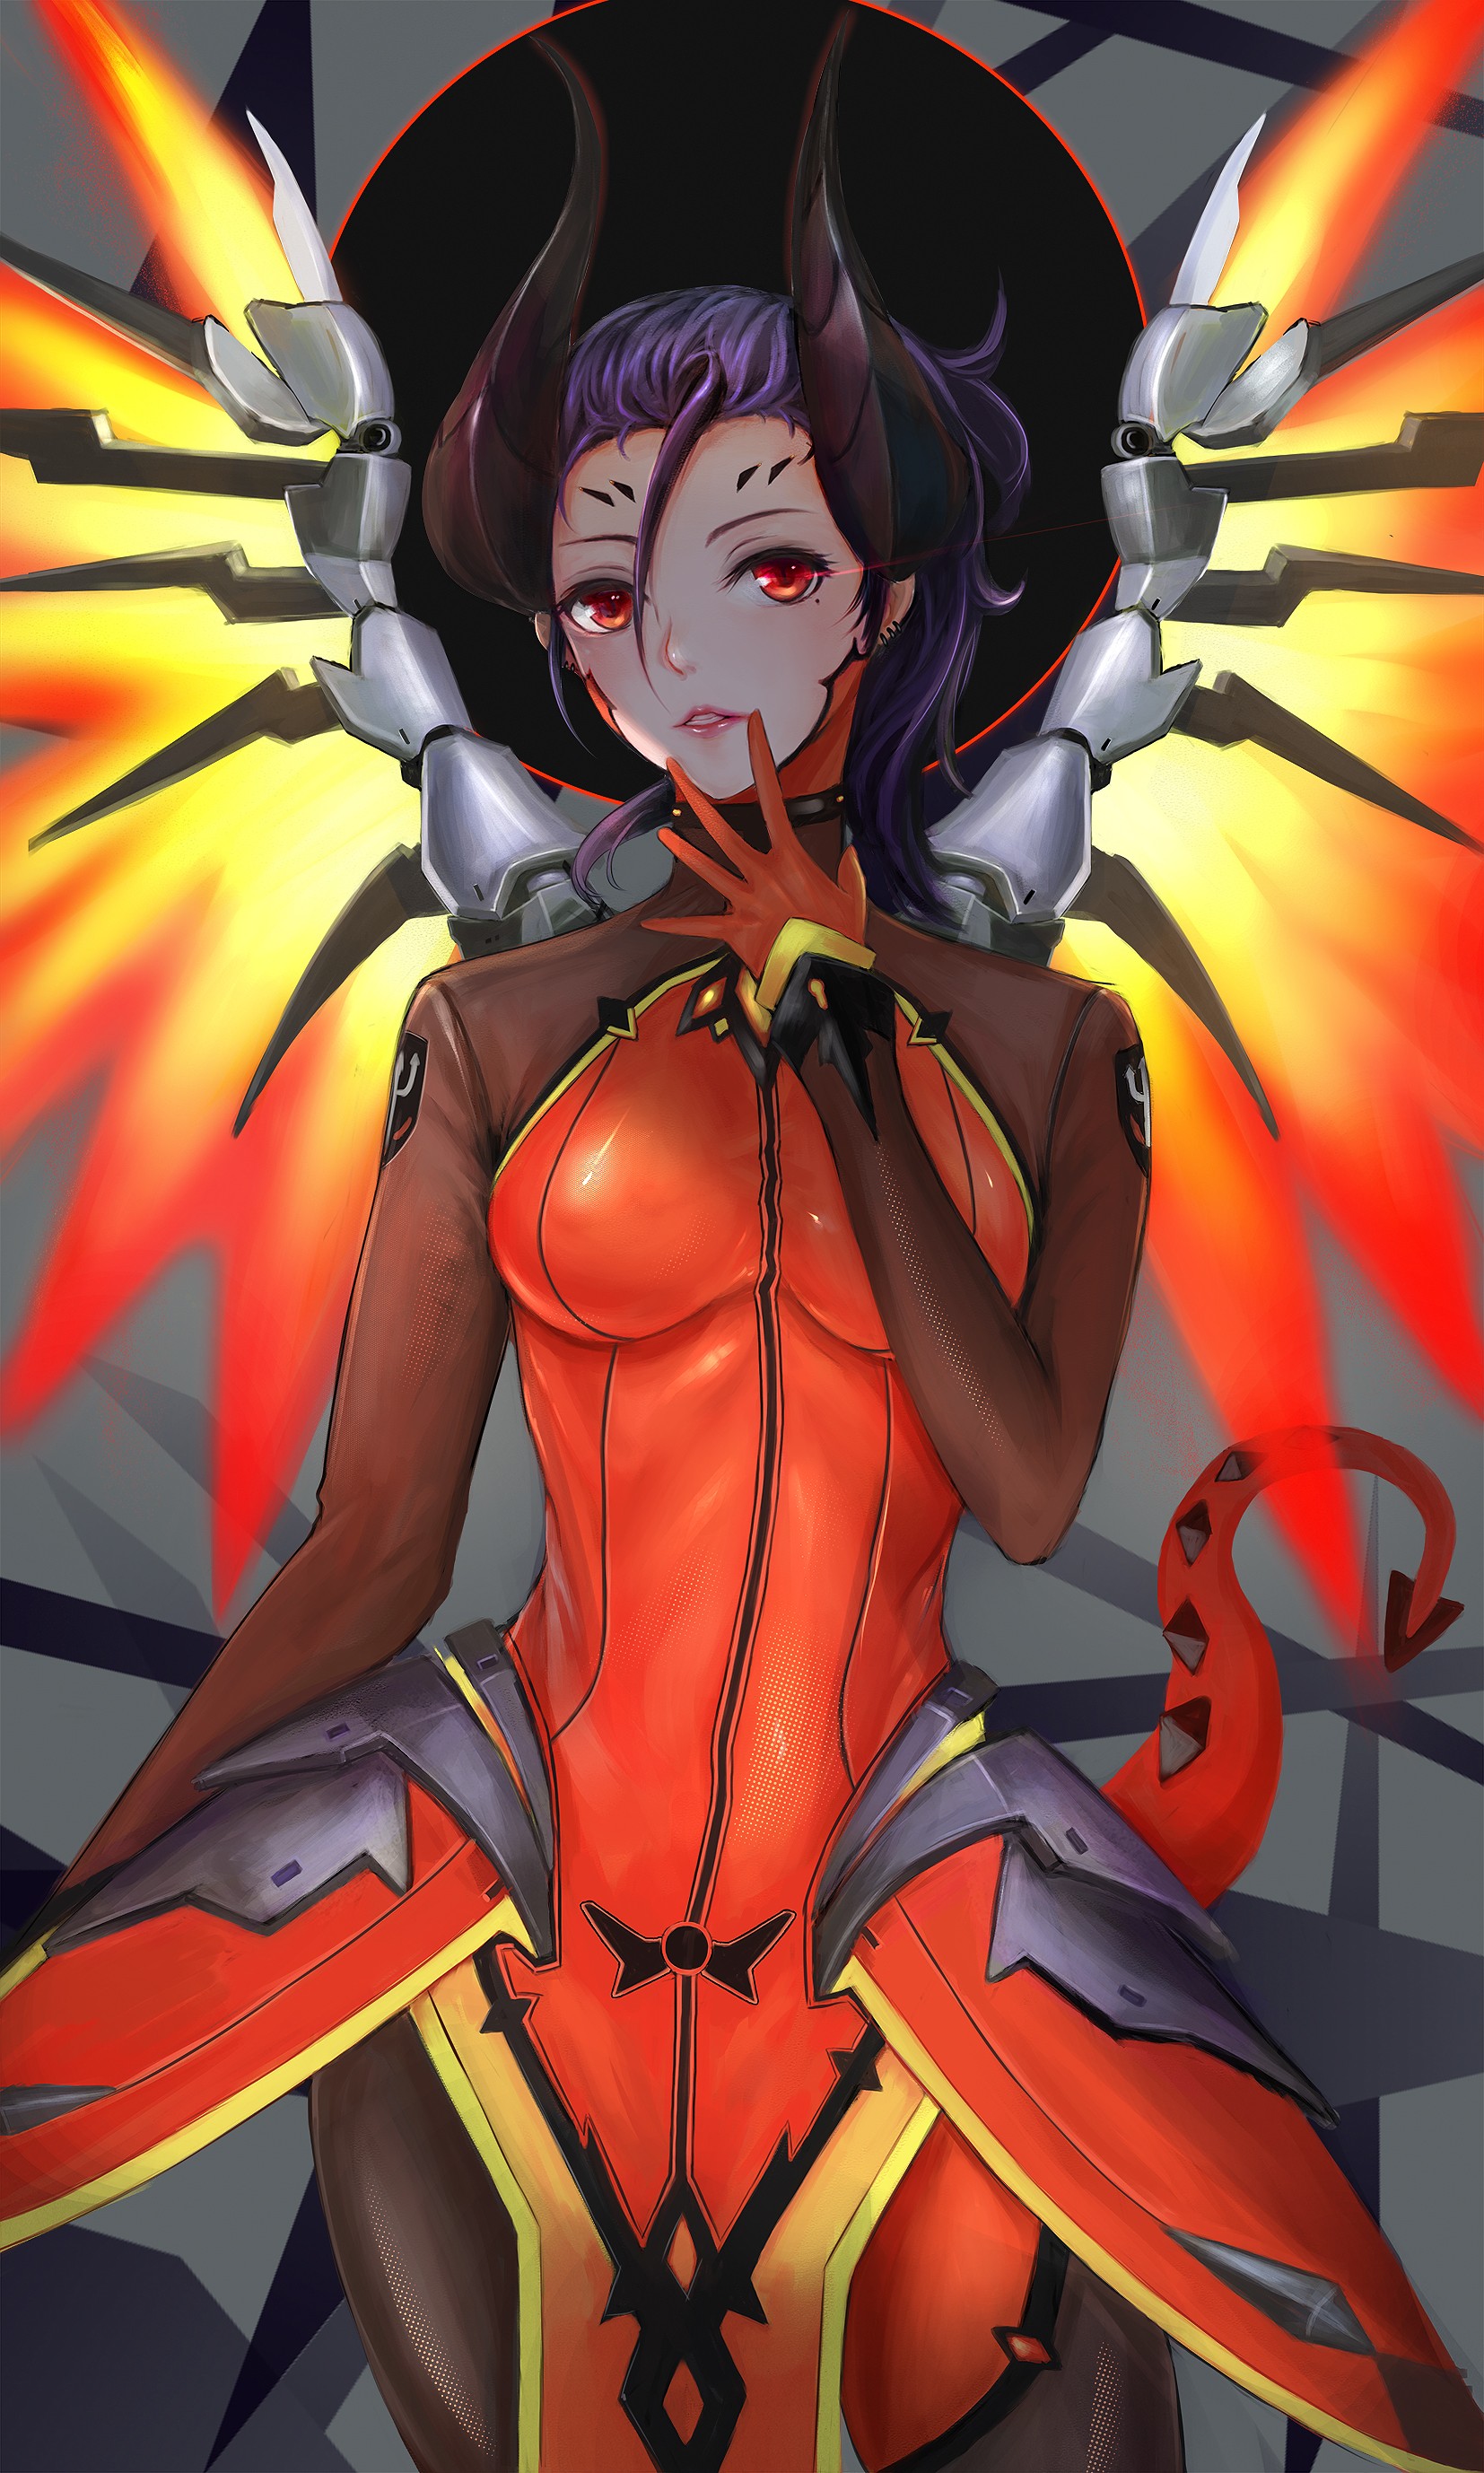 Anime 1654x2756 anime anime girls Overwatch Mercy (Overwatch) bodysuit horns tail wings short hair purple hair red eyes video game girls Pixiv fan art PC gaming video game characters